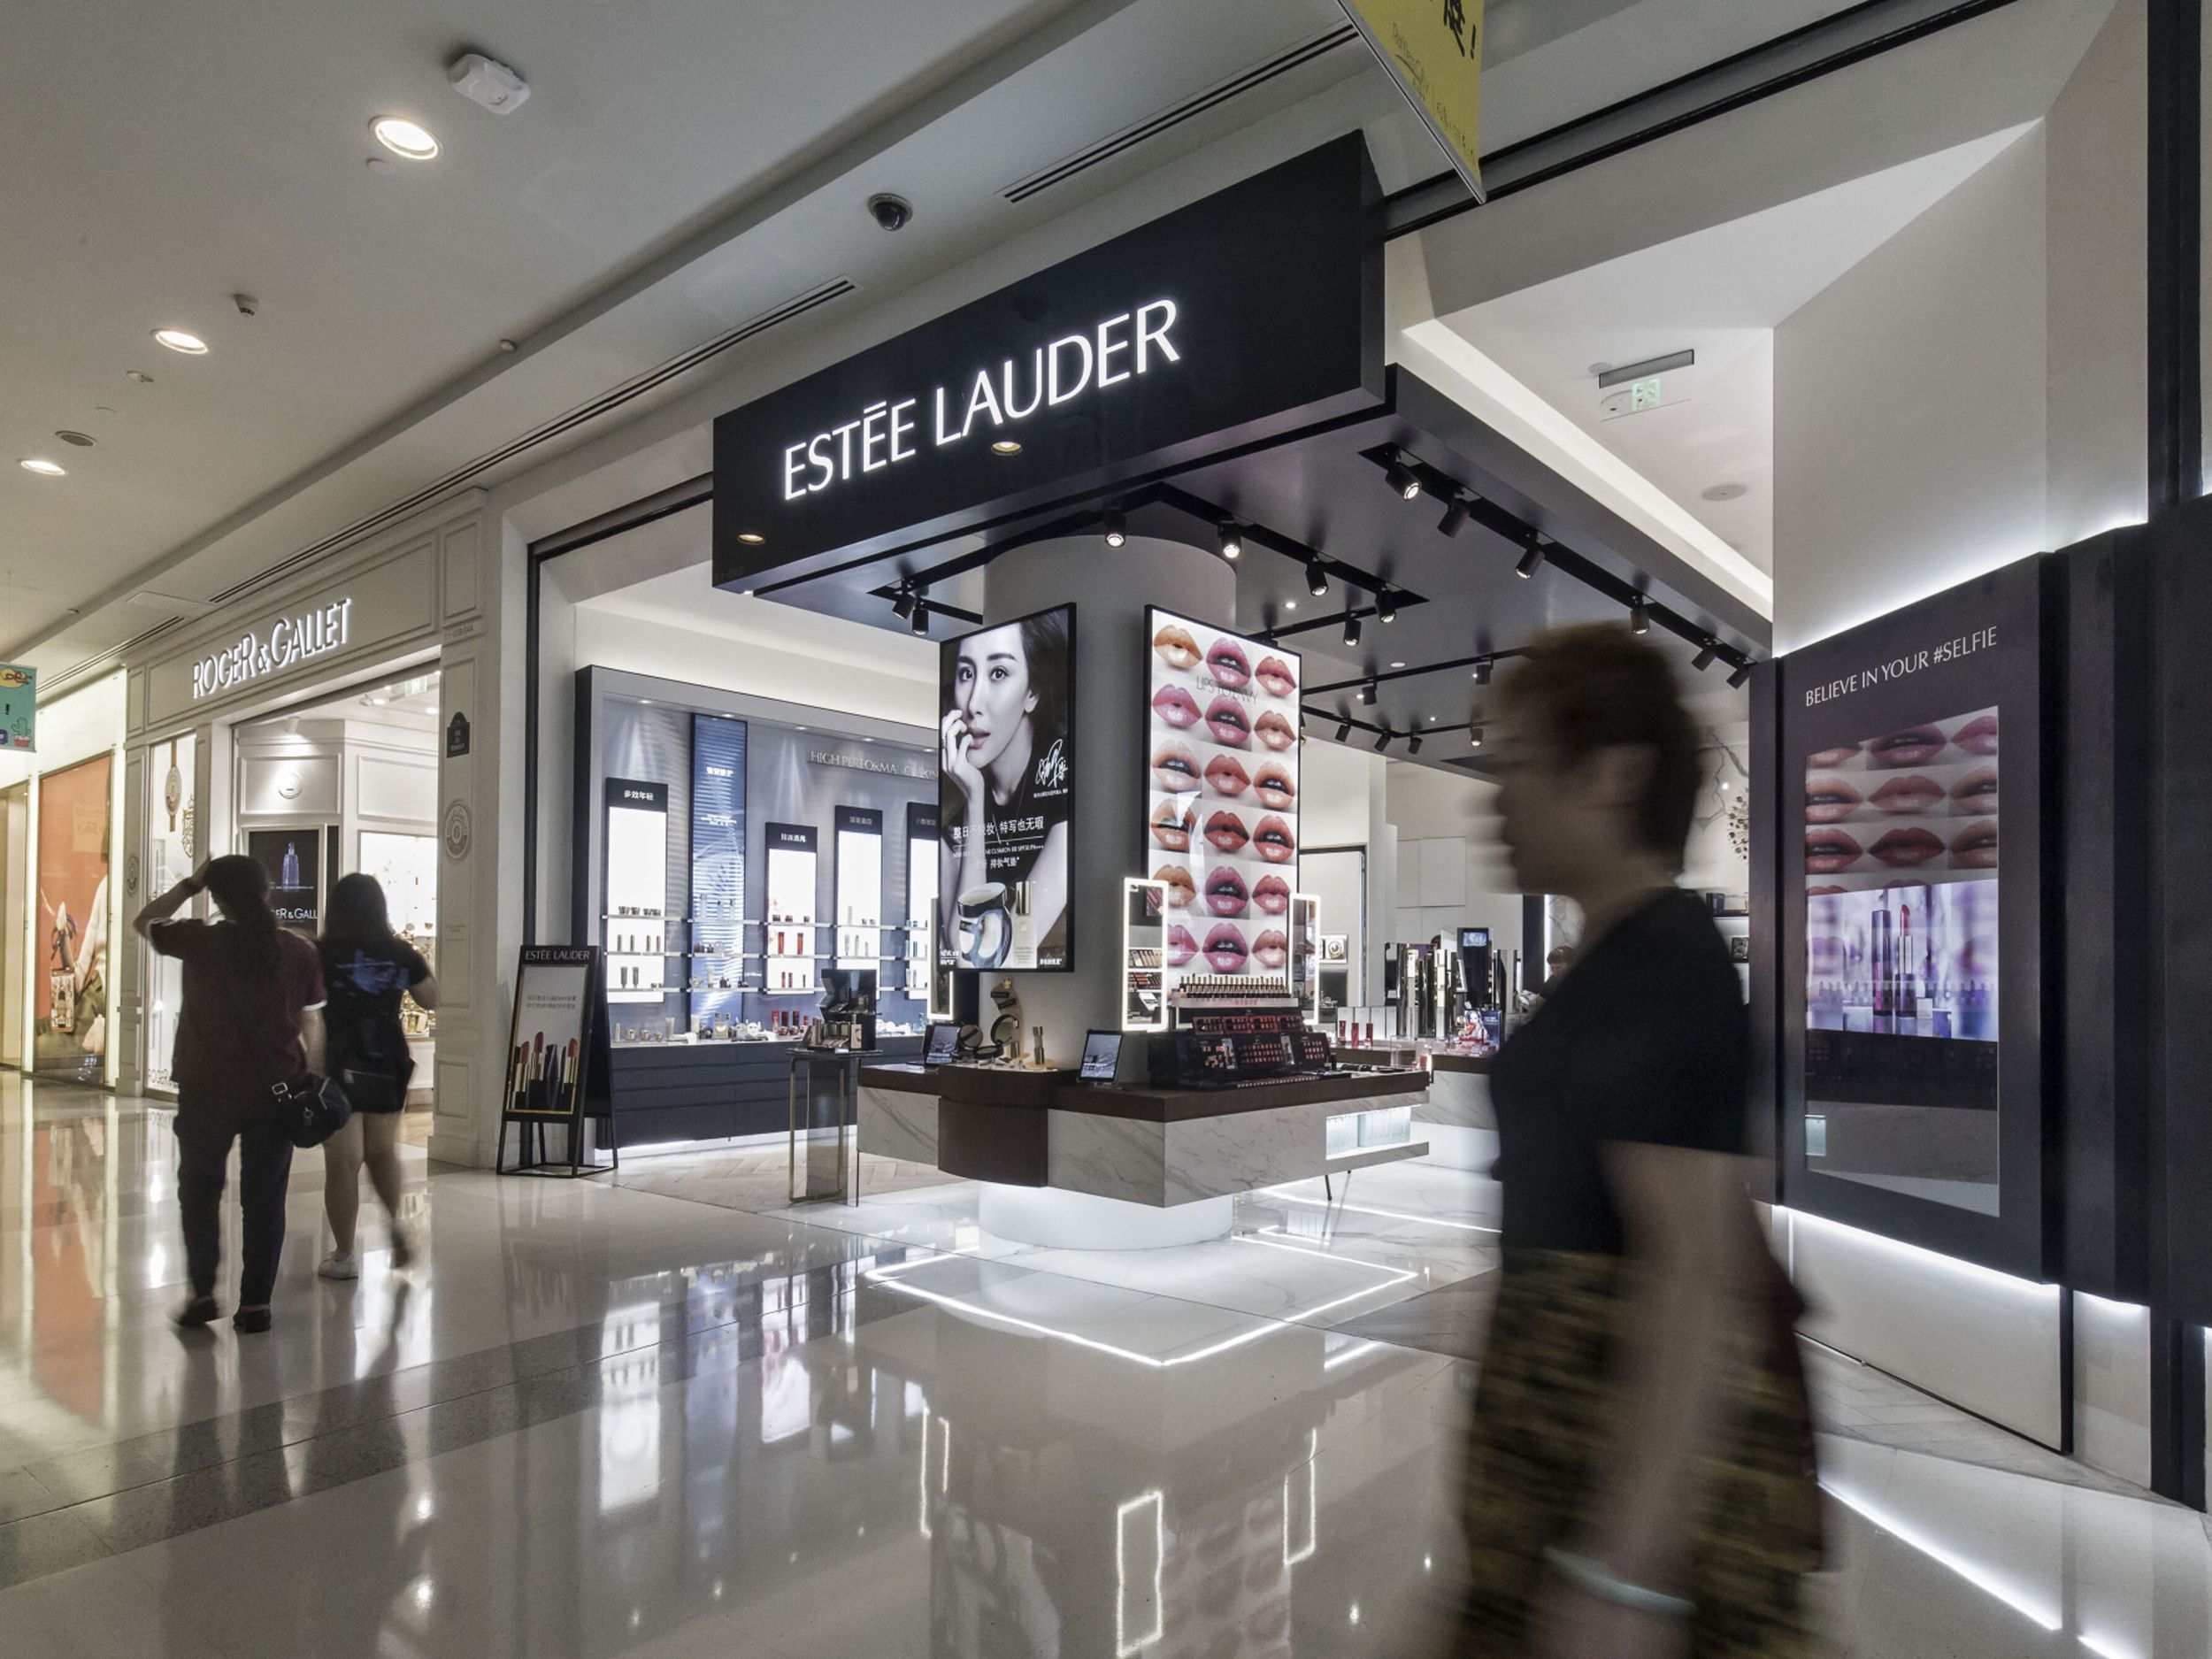 Why Has Estee Lauder's Revenue Grown 3x More Than That Of L'Oreal Over The  Past 5 Years?